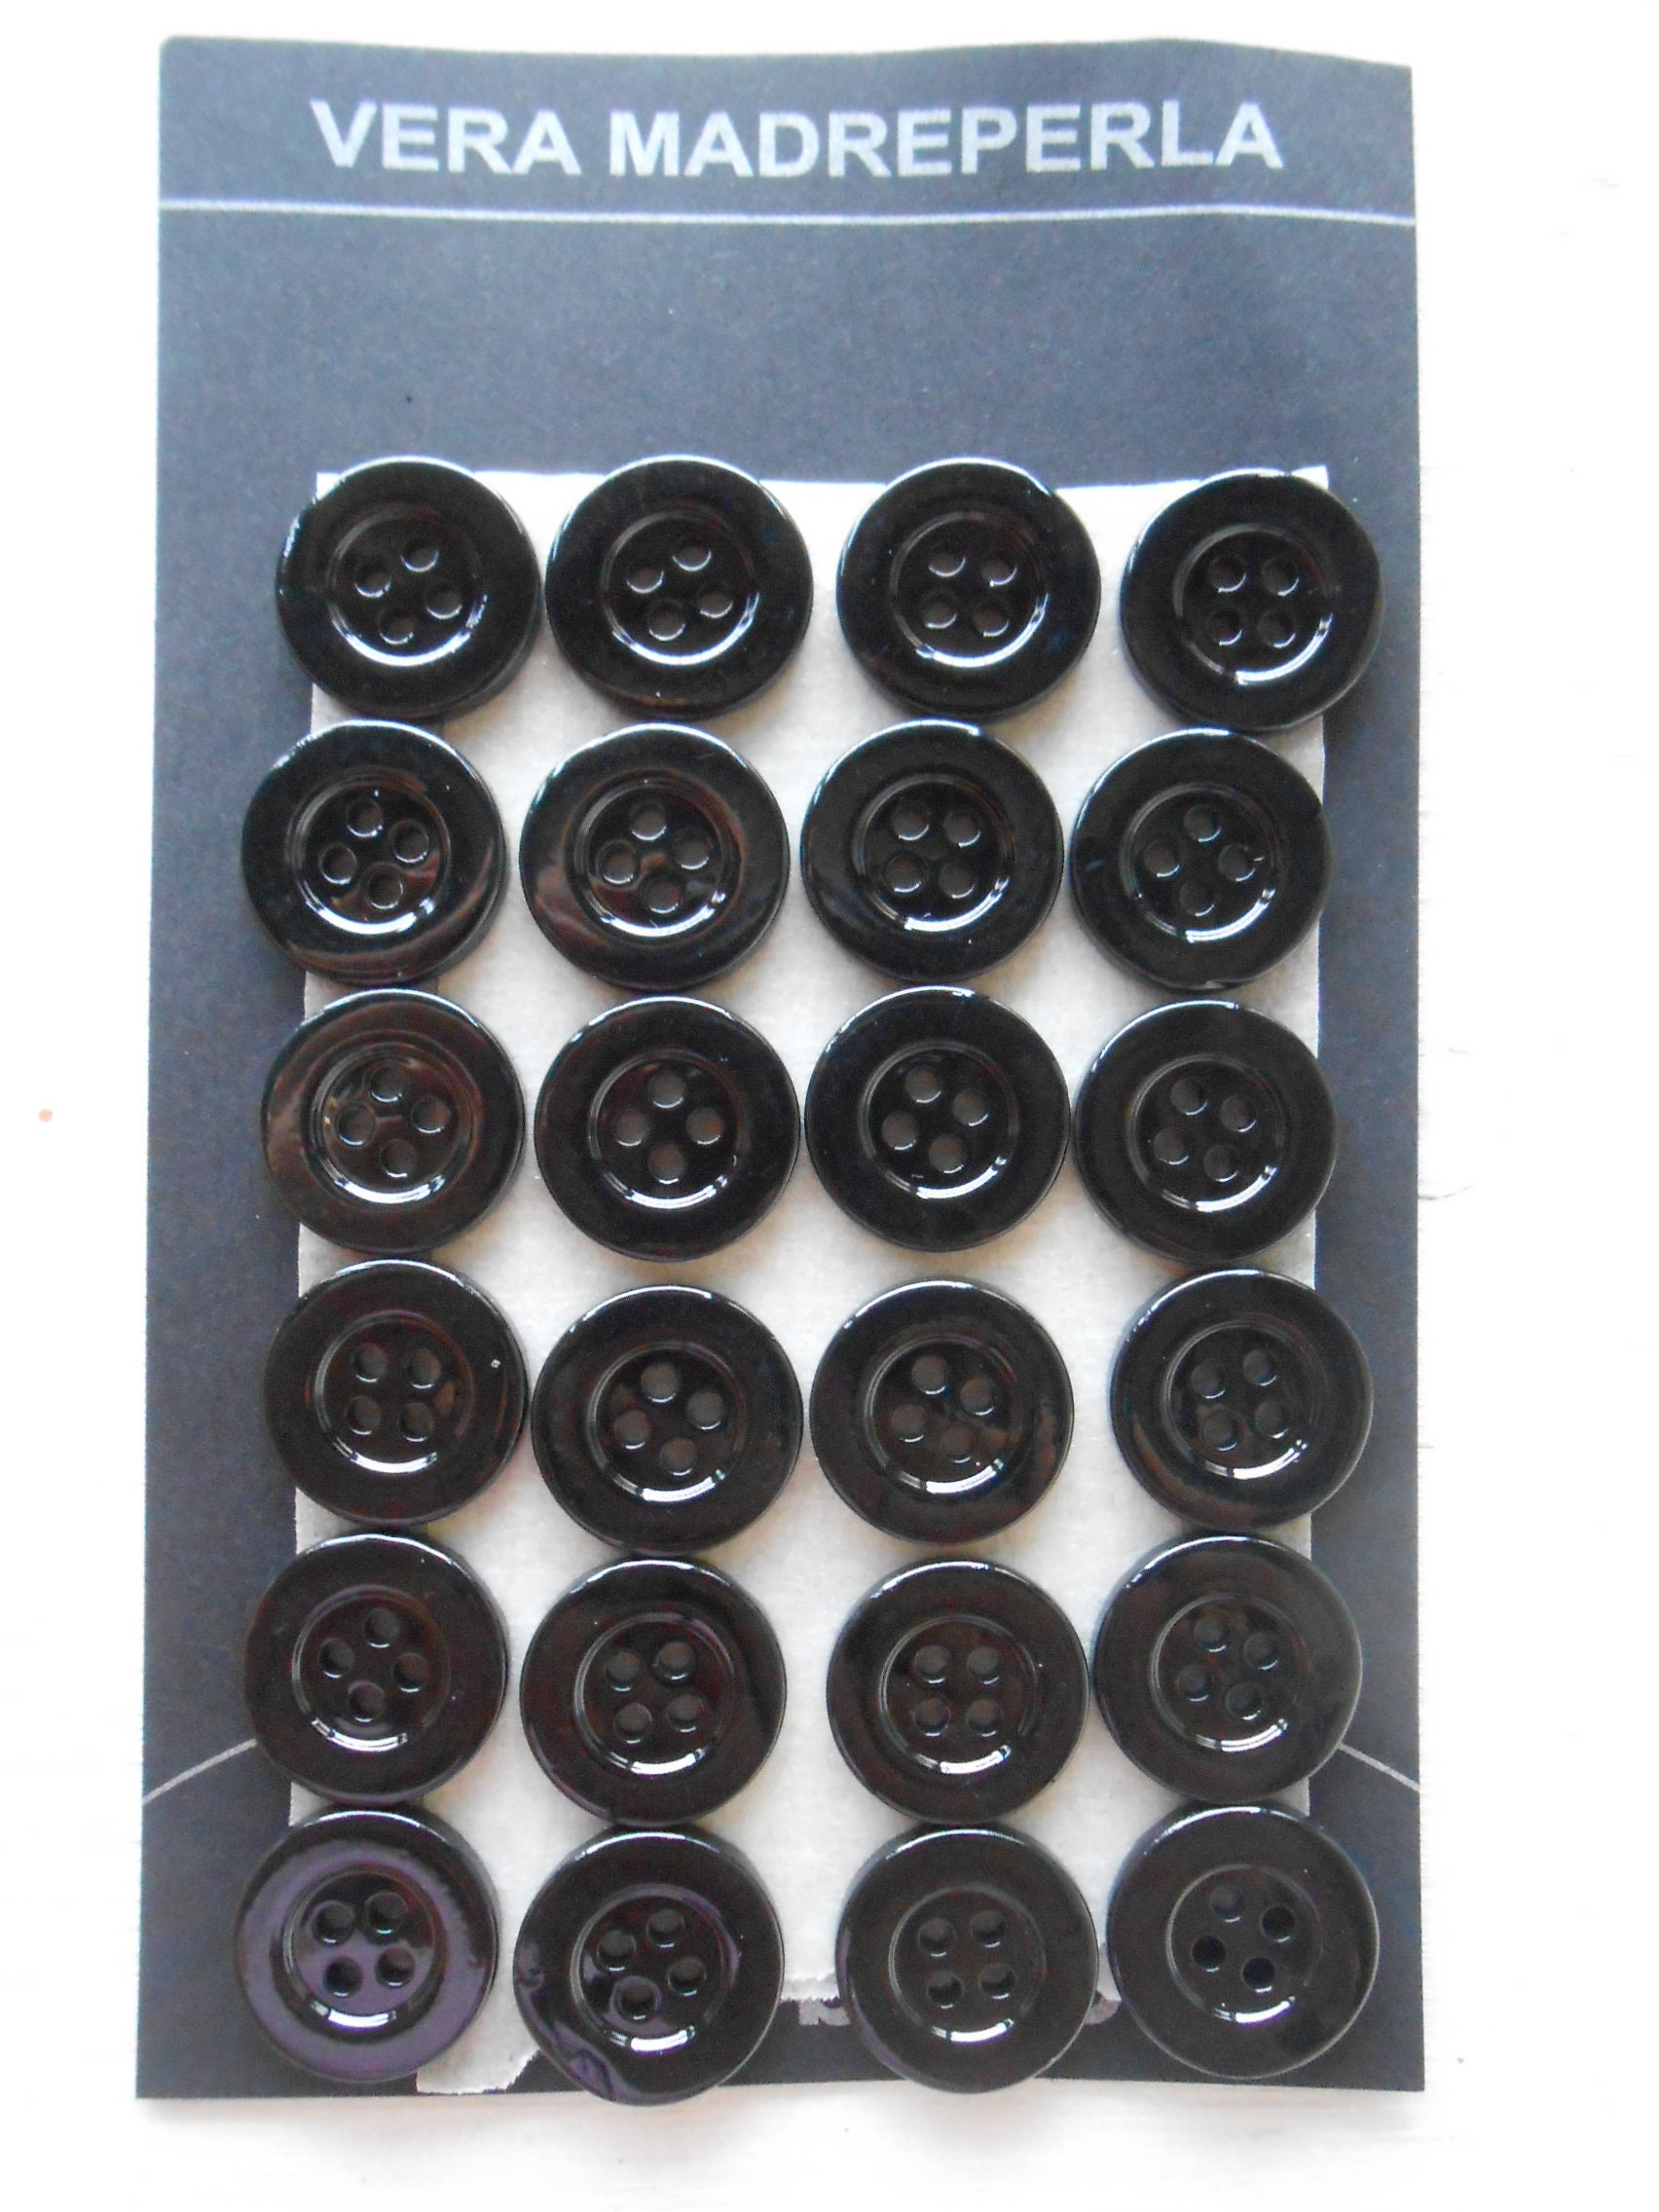 50 X 9mm Black Dolly Buttons, Small Black Buttons, Round Buttons, Shiny  Black Buttons, Tiny Buttons, Wholesale Buttons, Opalescent Buttons 